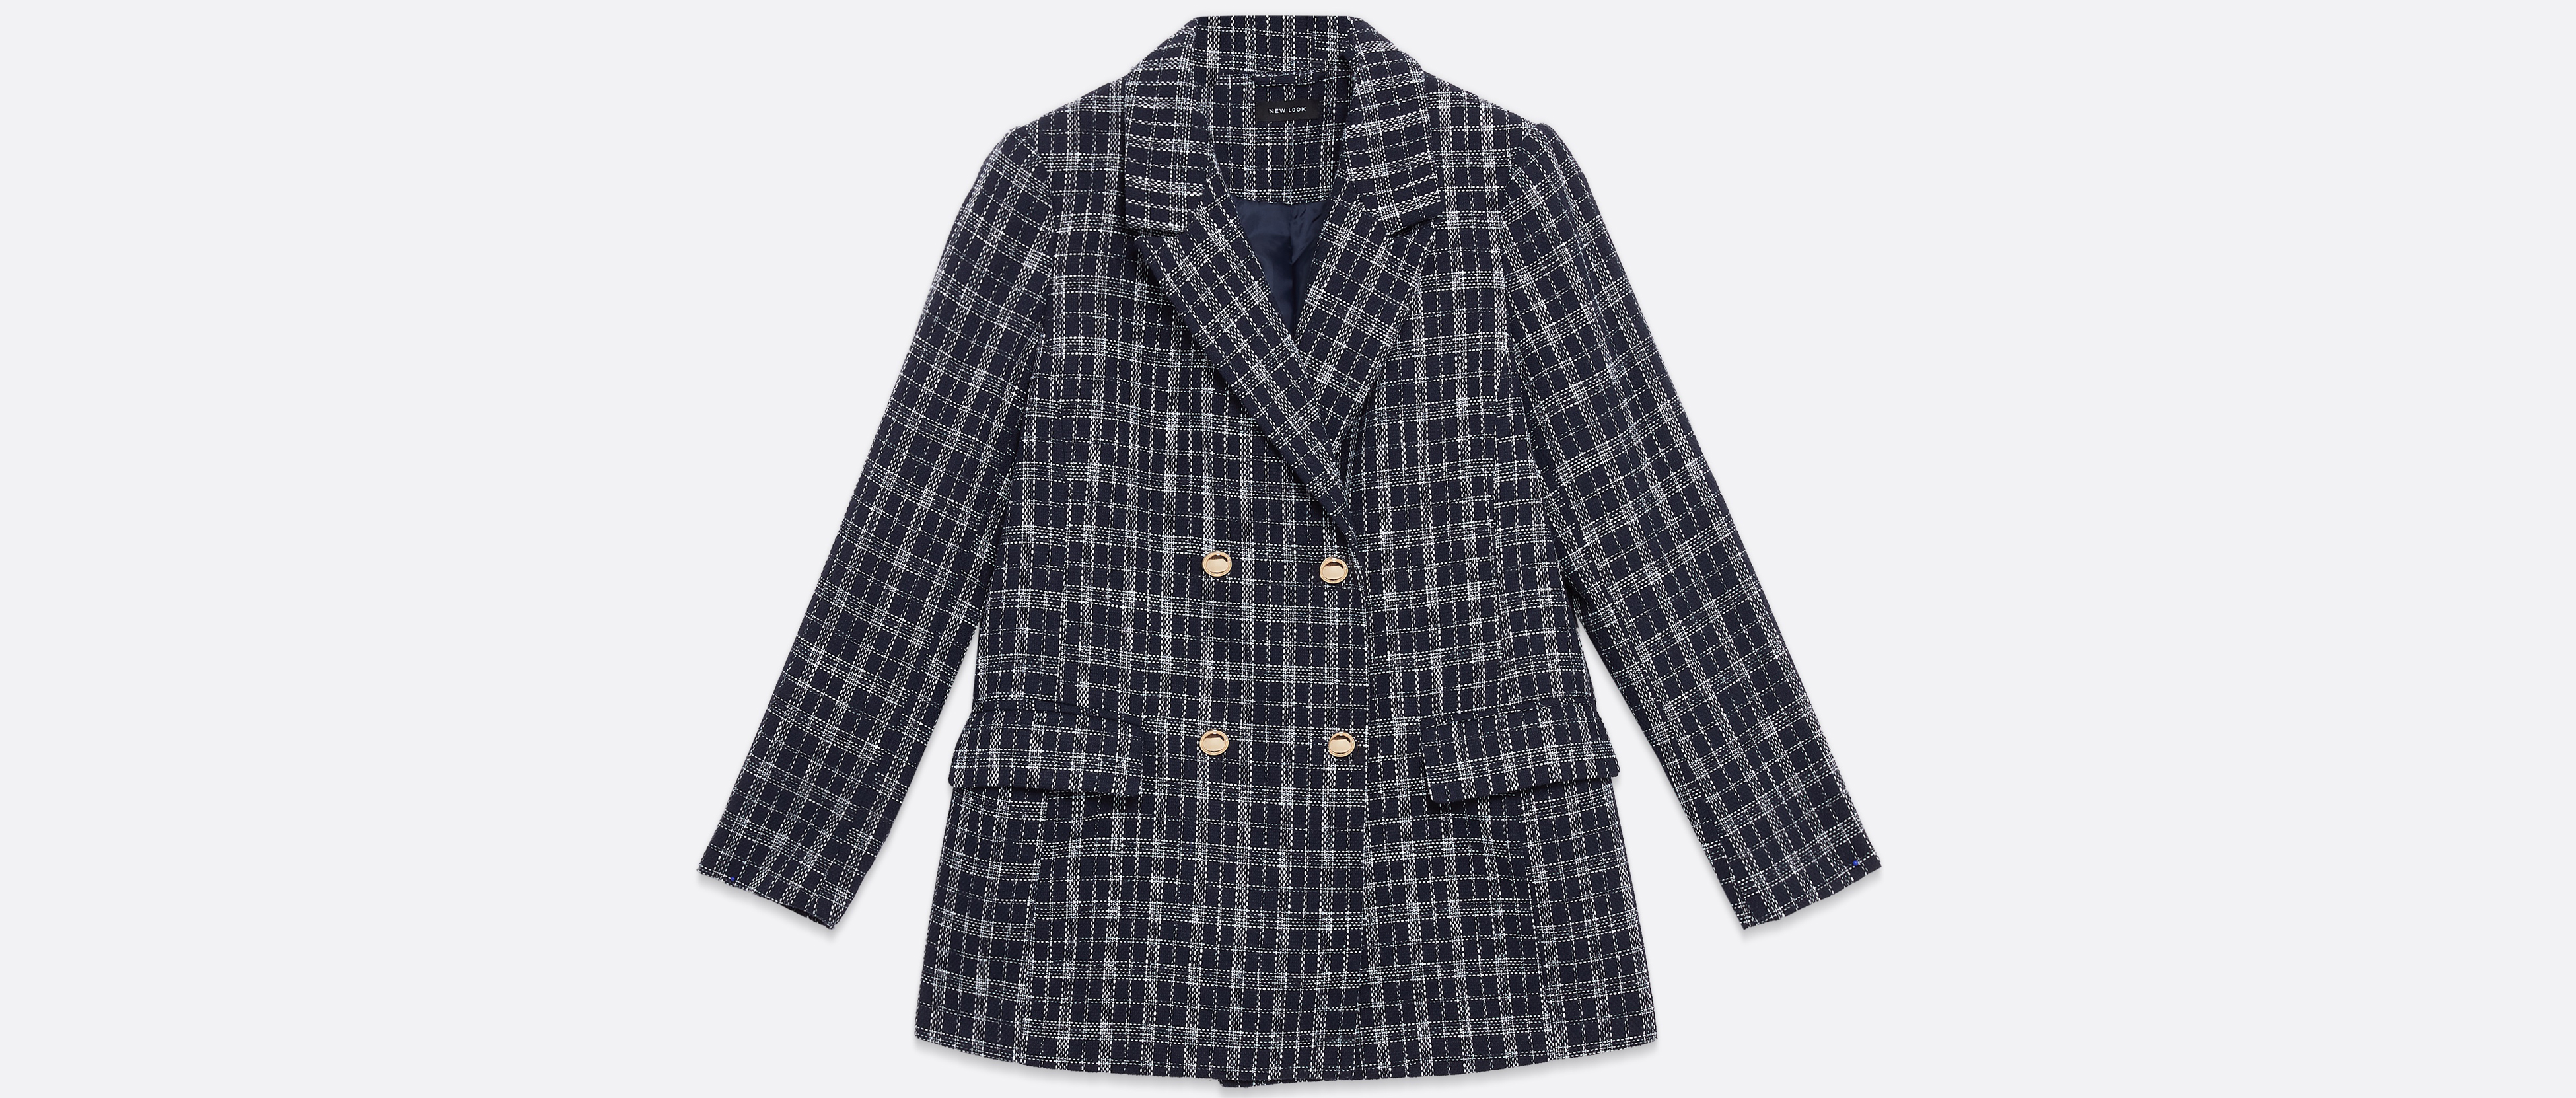 New Look Blue Check Bouclé Double Breasted Blazer, £35.99